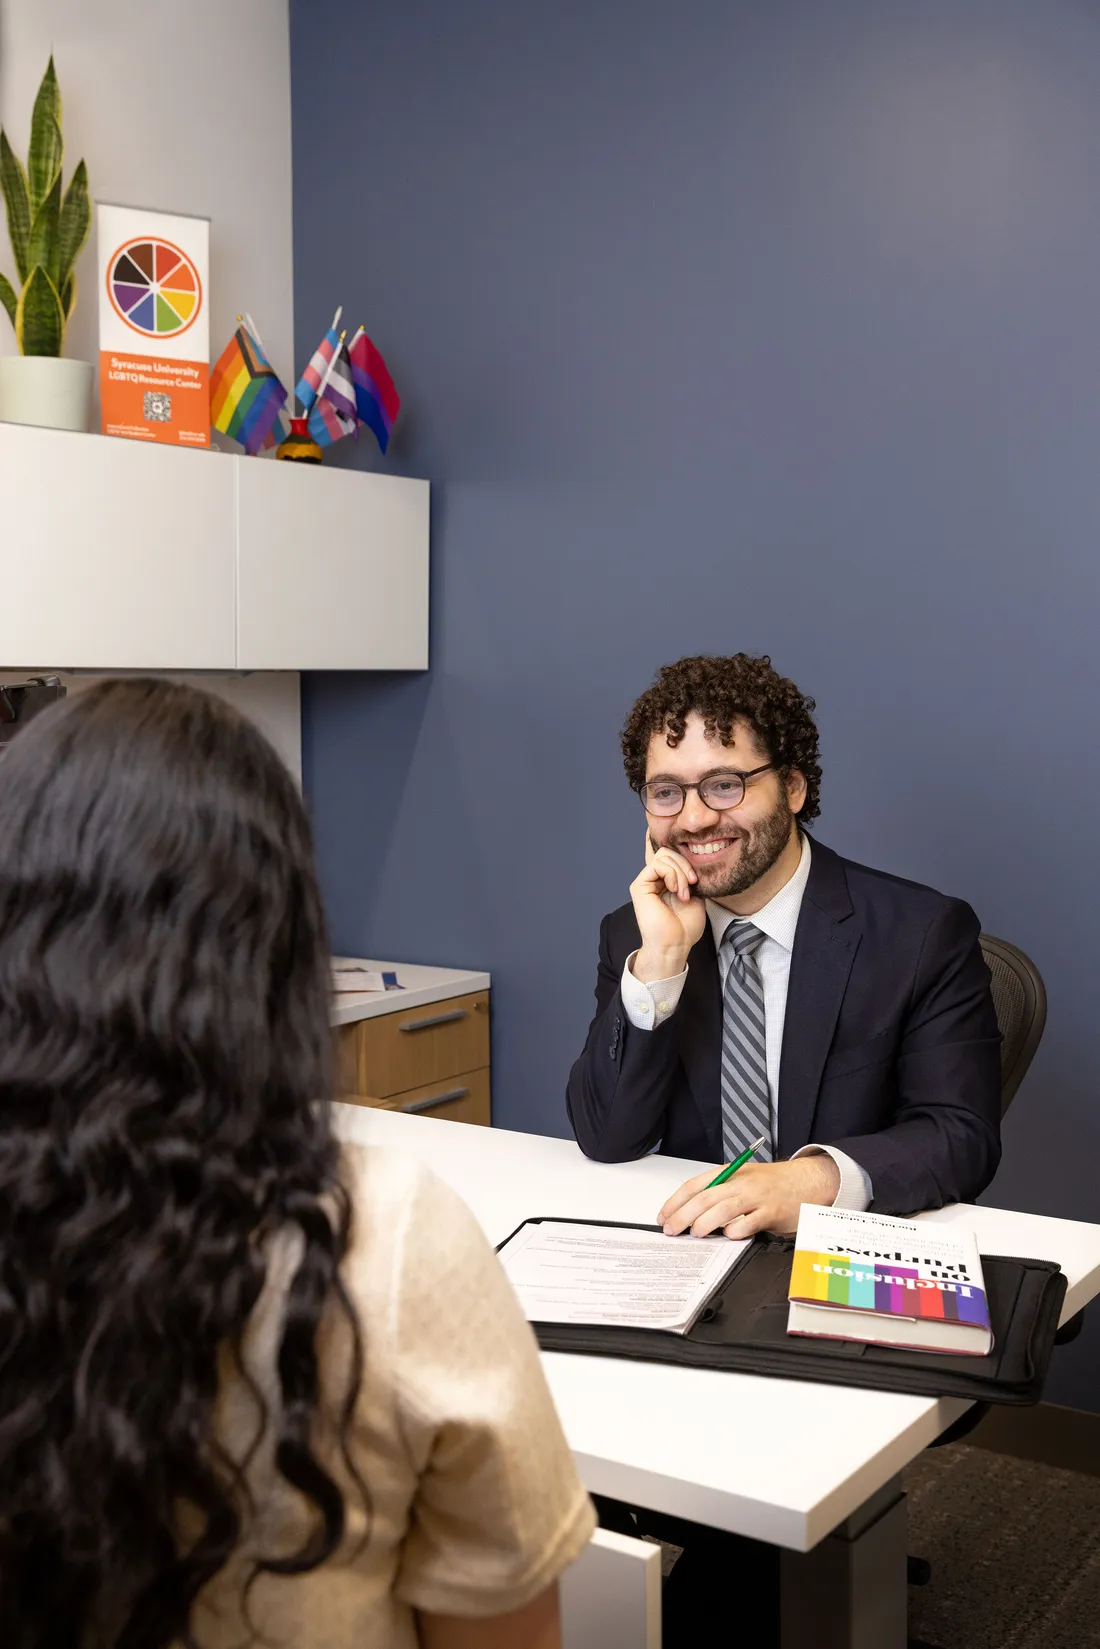 Joshua Sequí-Rodriguez talking with a person at his desk.